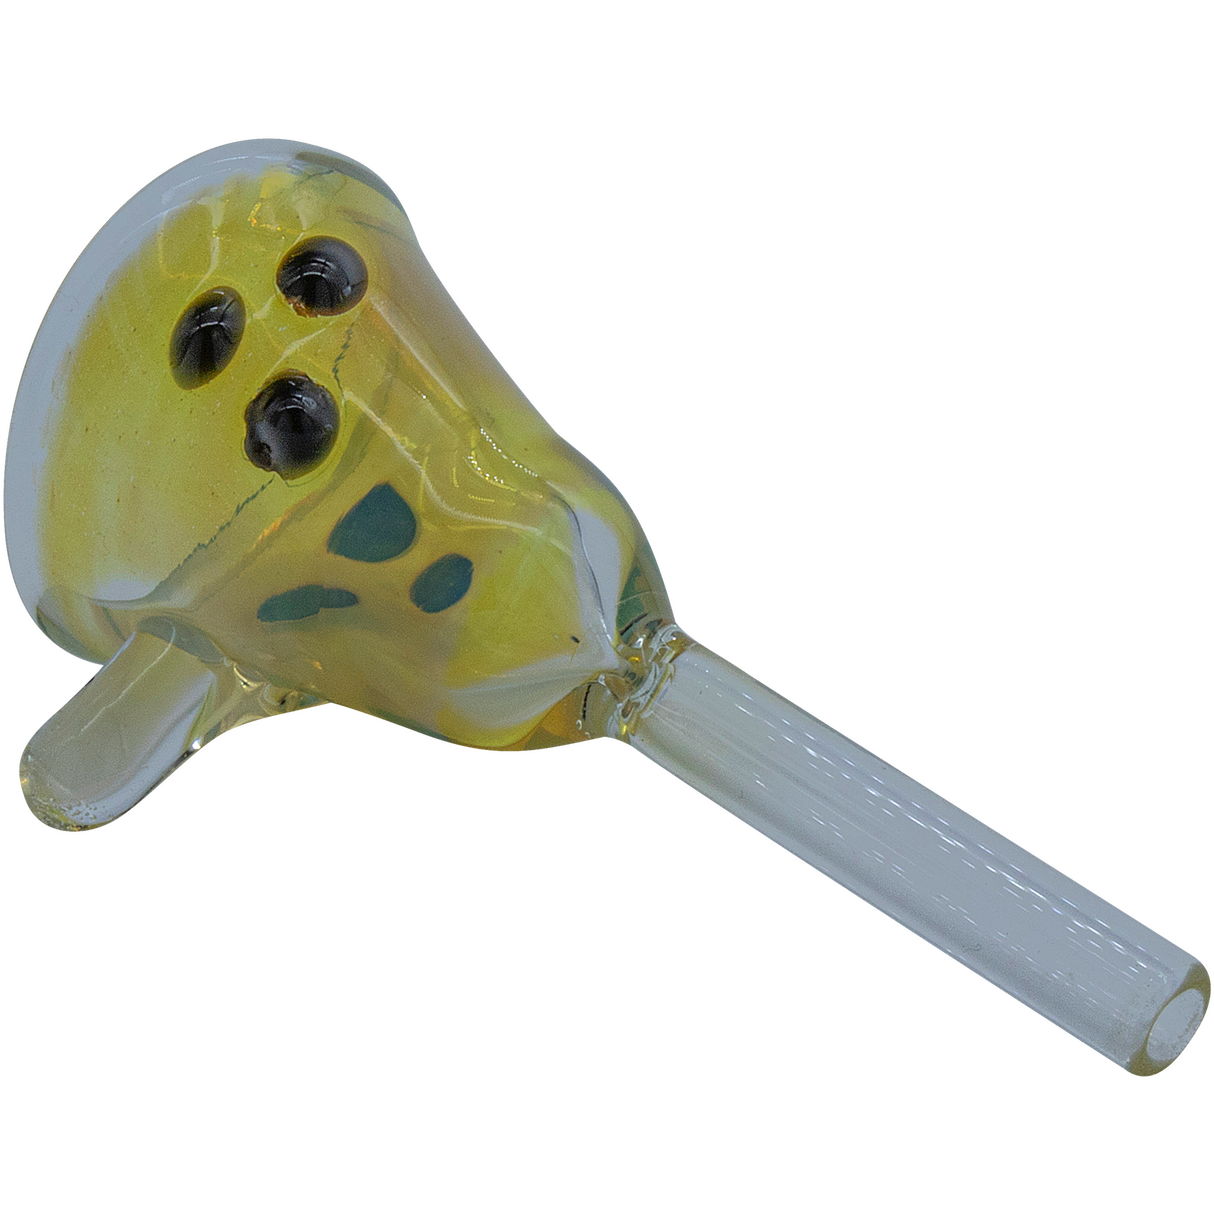 LA Pipes "Mission Bell" Pull-Stem Slide Bowl in Black, Borosilicate Glass, Top View